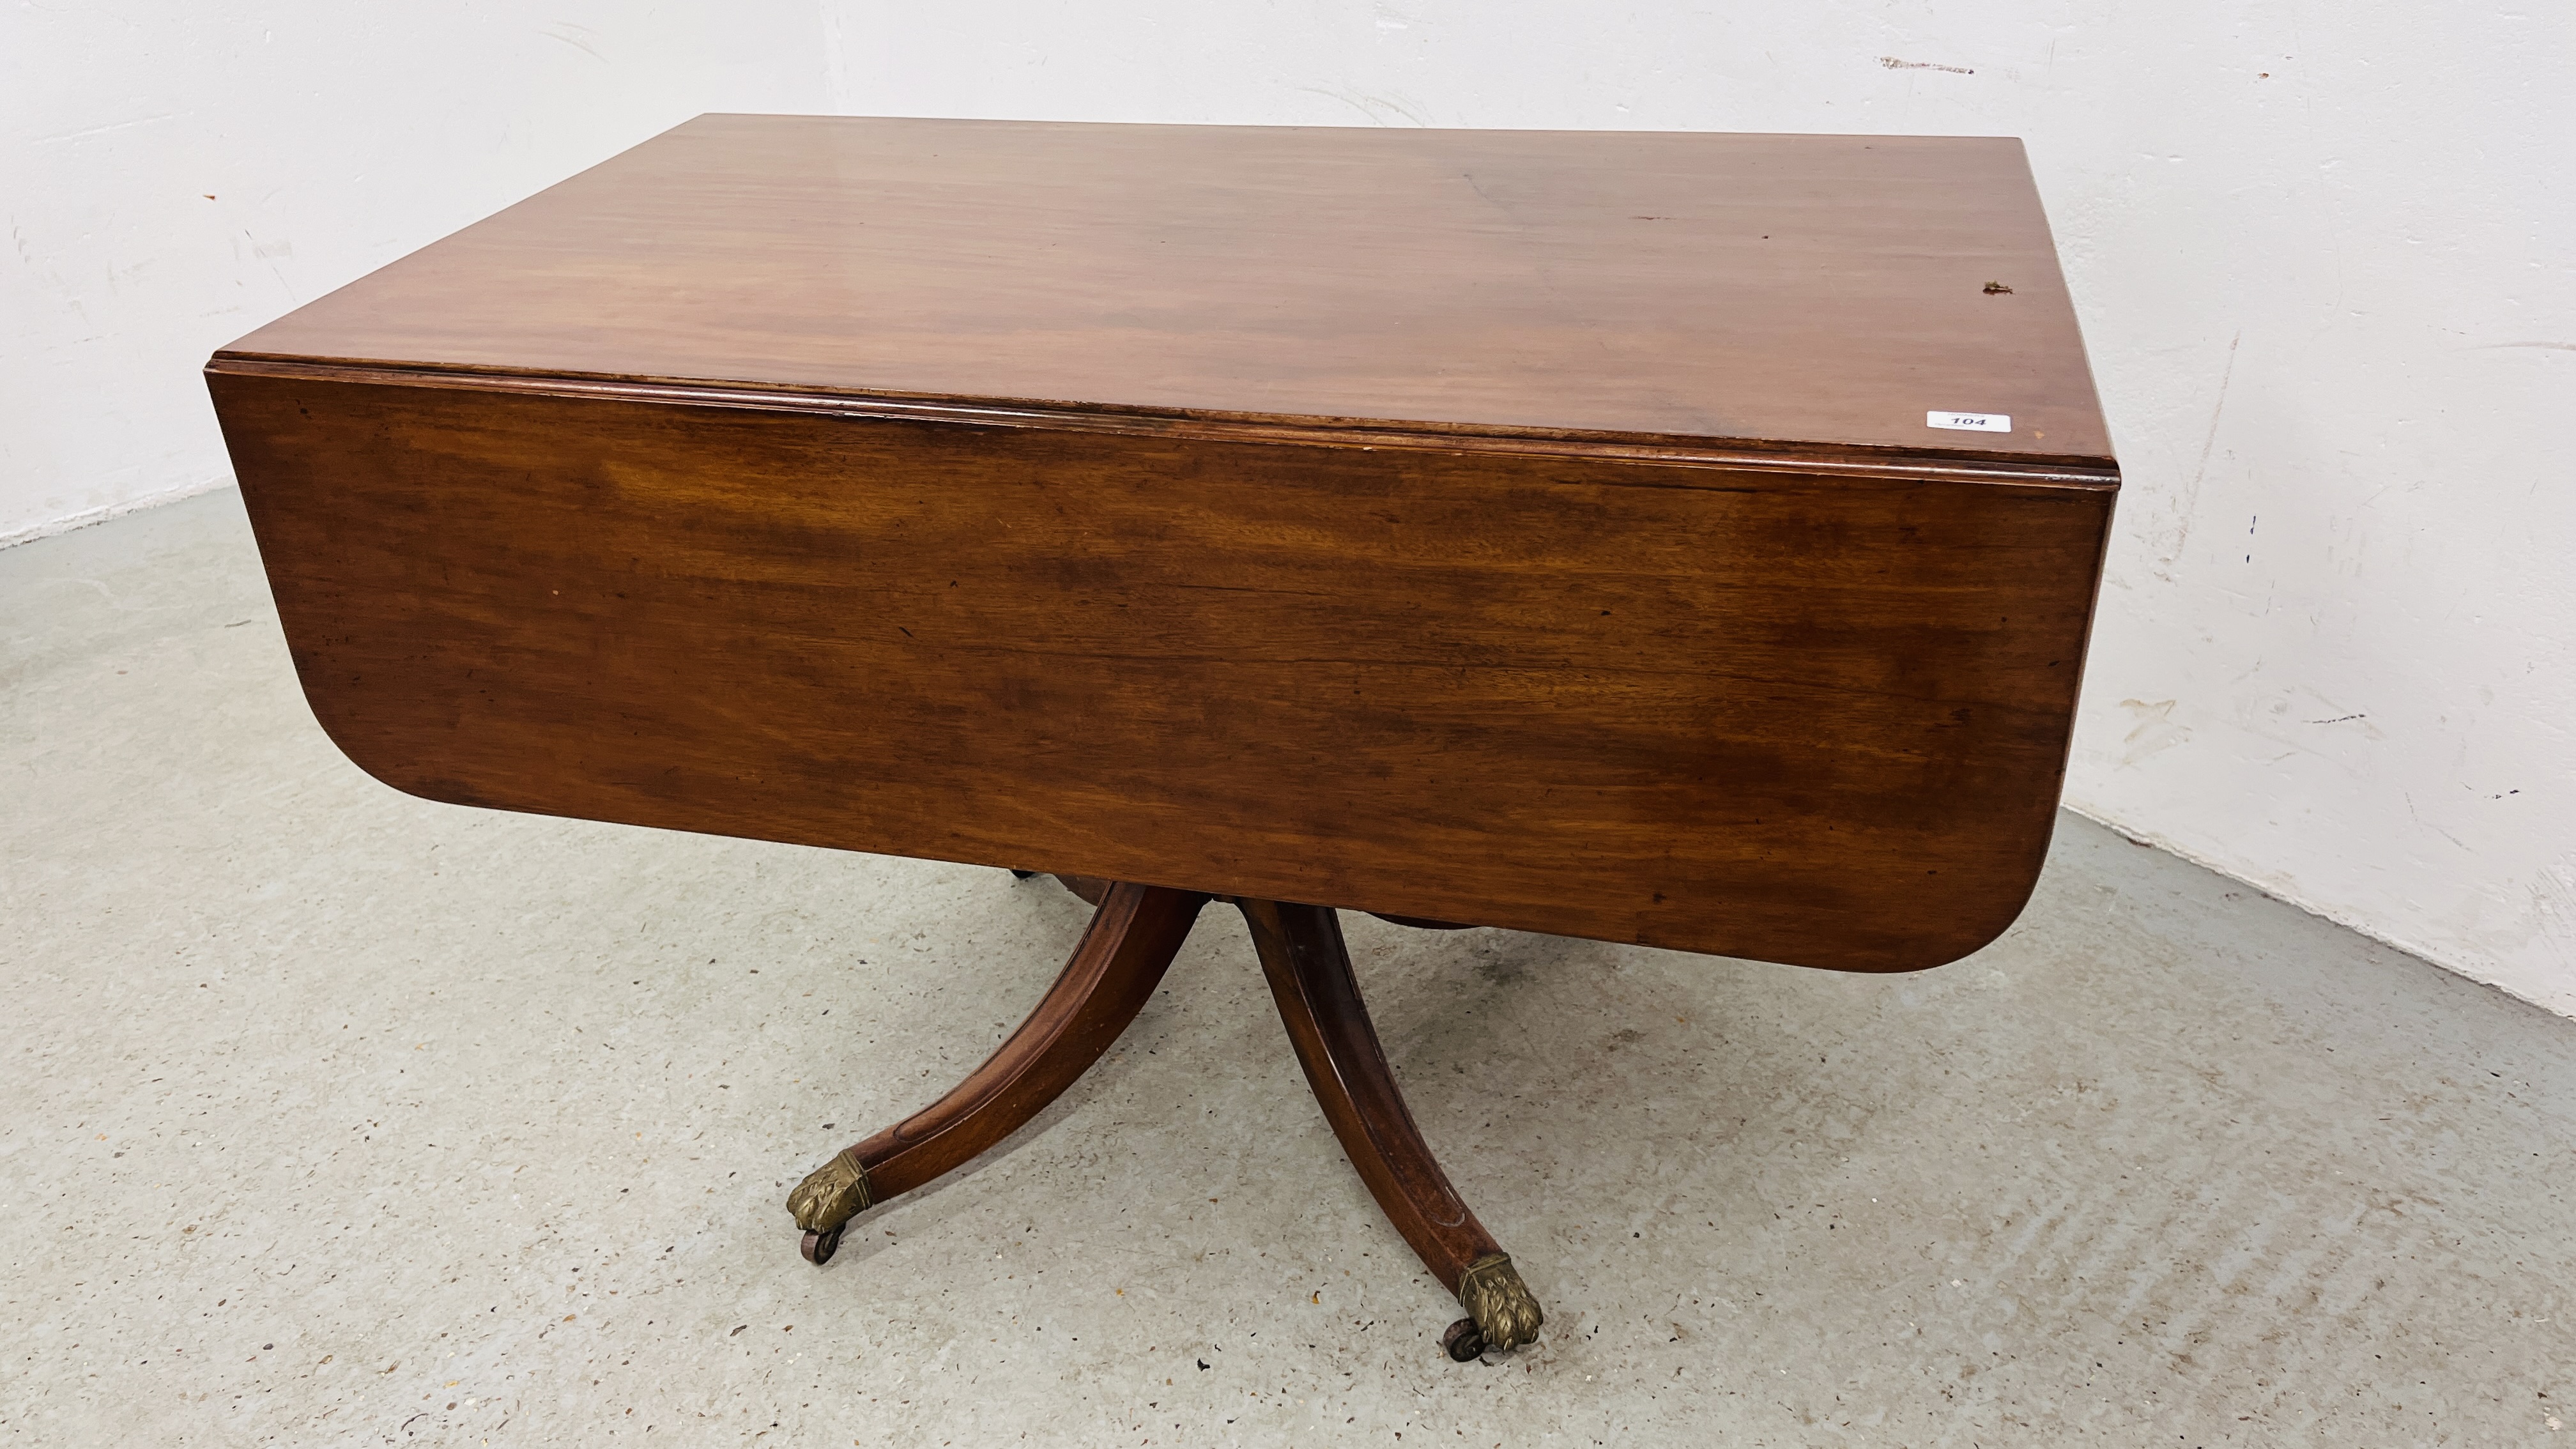 A REGENCY MAHOGANY DROP LEAF PEDESTAL TABLE, THE TWO DRAWERS ABOVE OUTSWEPT LEGS,